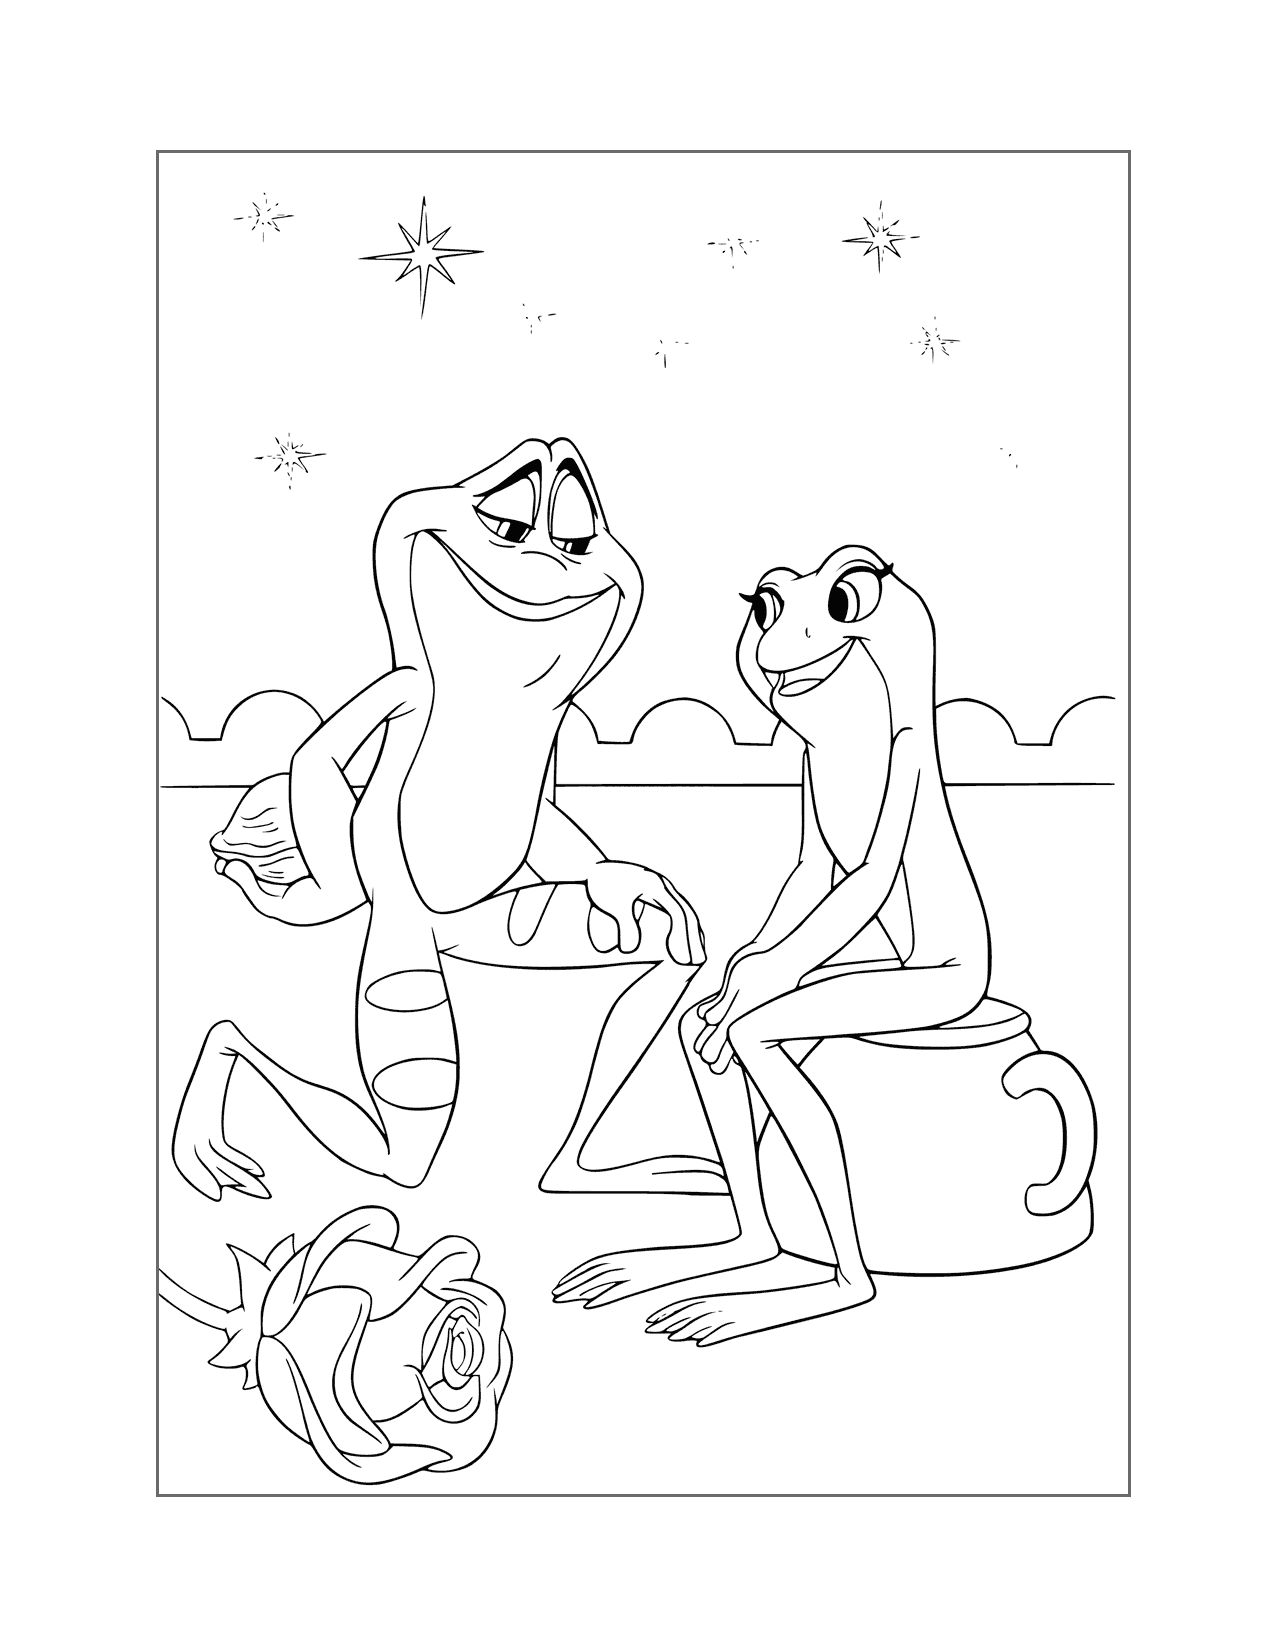 Frog Naveen Proposes Coloring Page